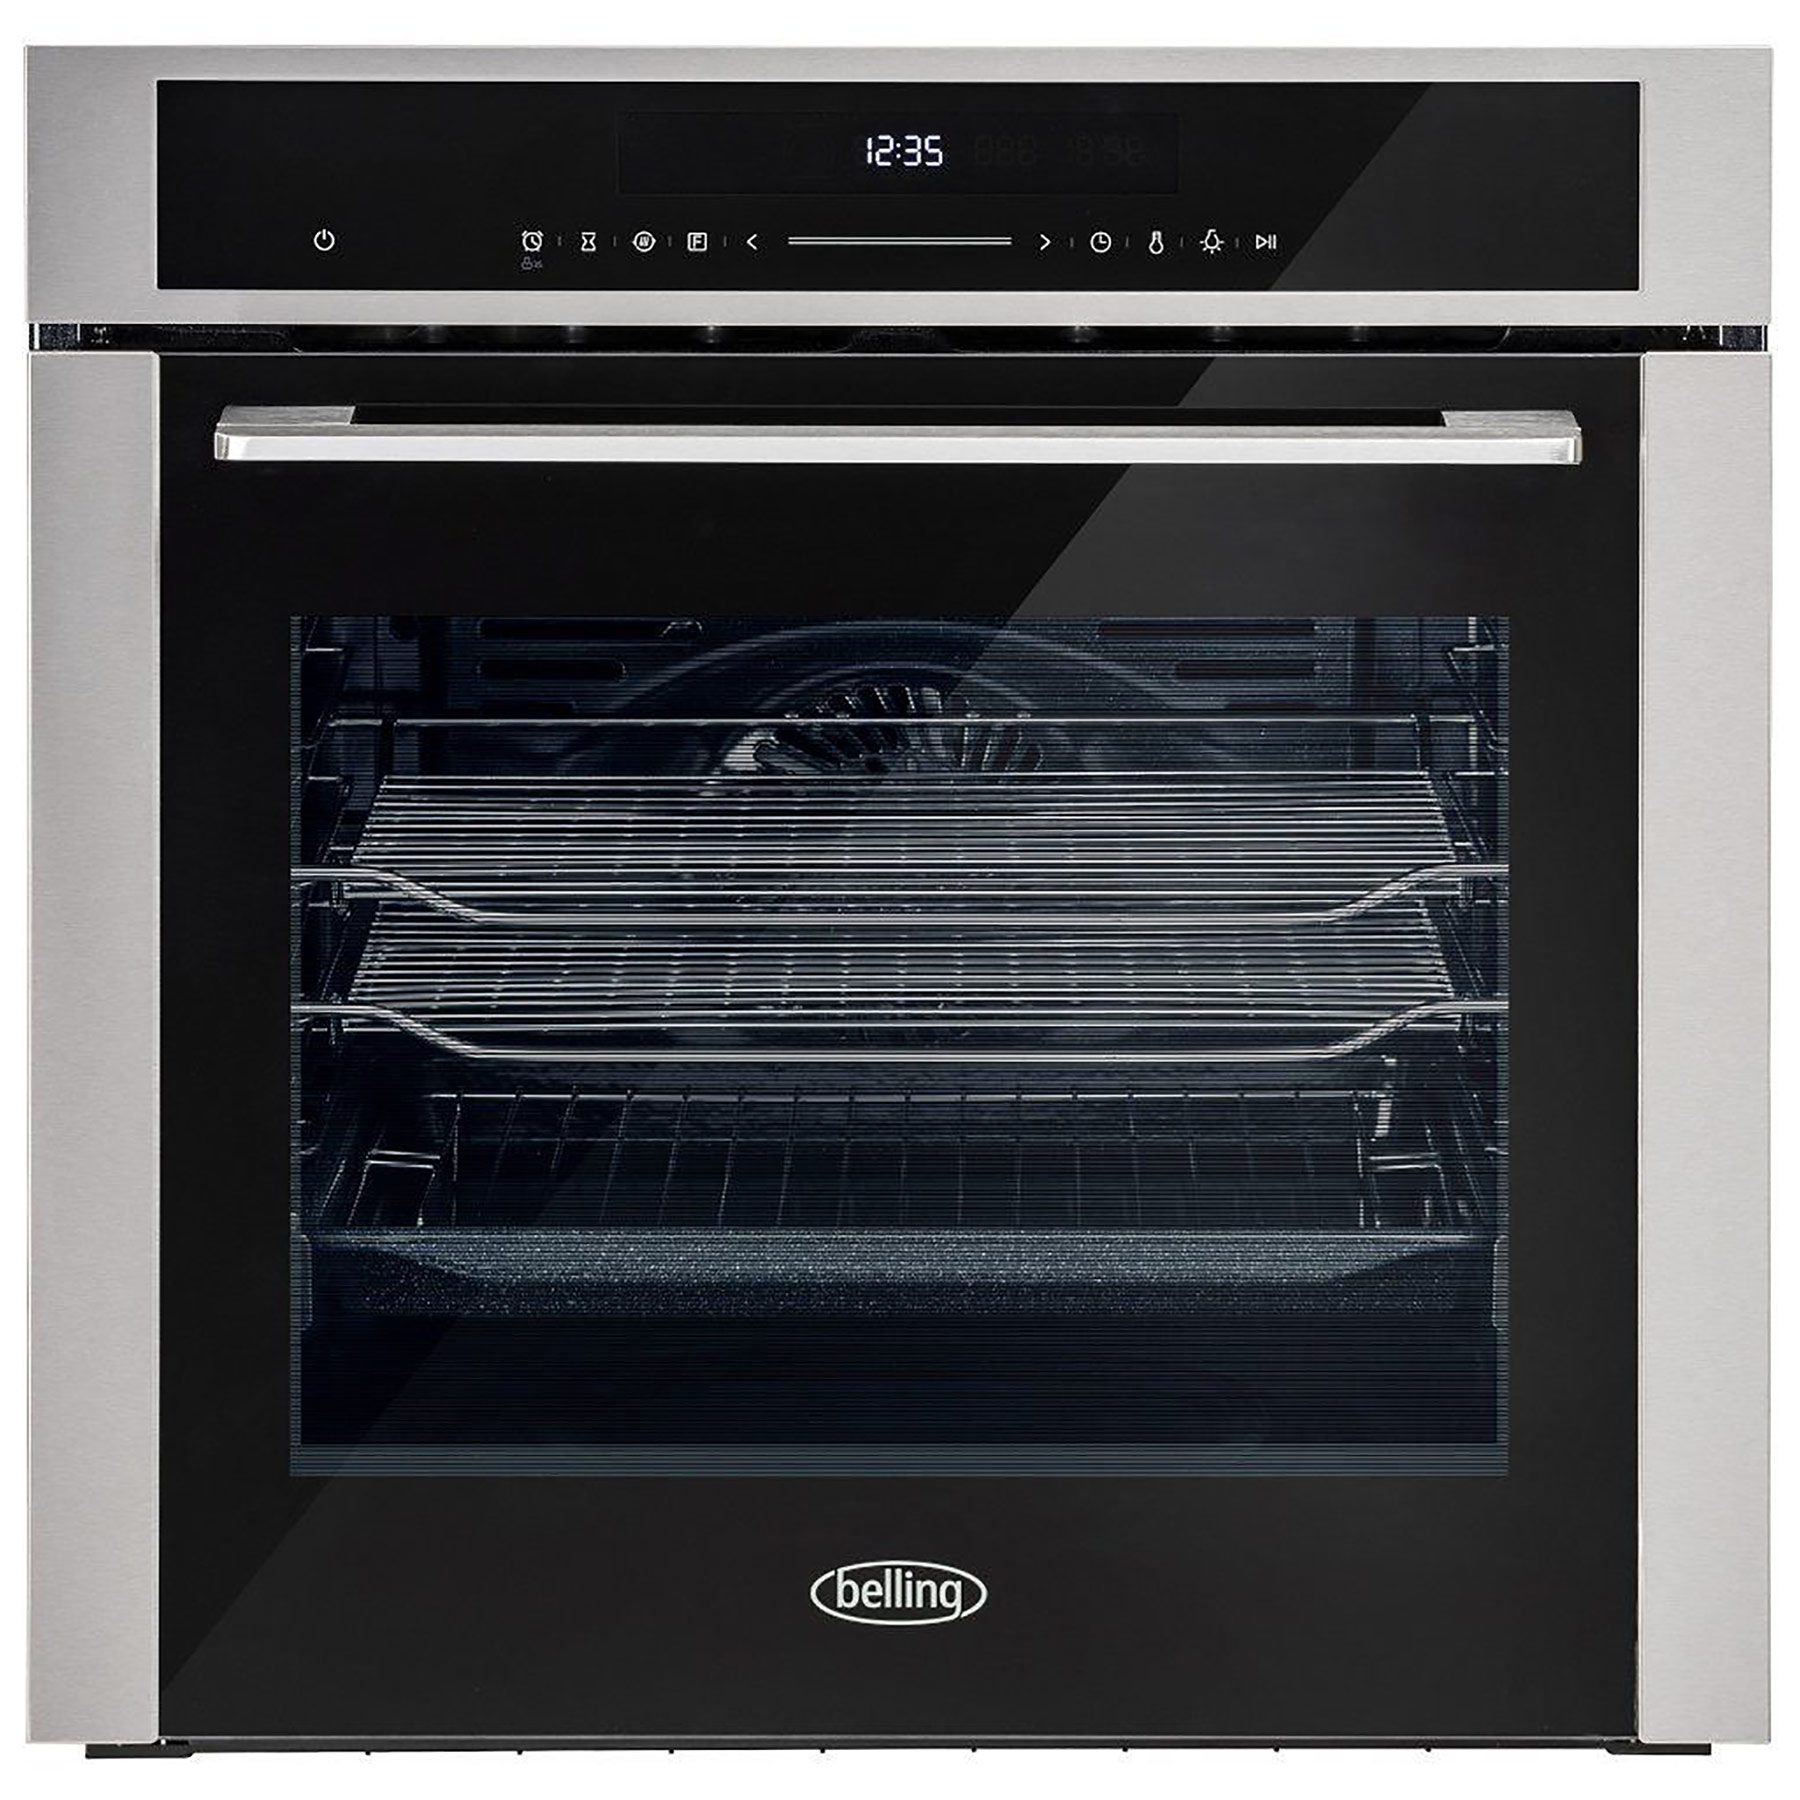 Image of Belling 444411401 Built In Electric Single Oven in St Steel 72L